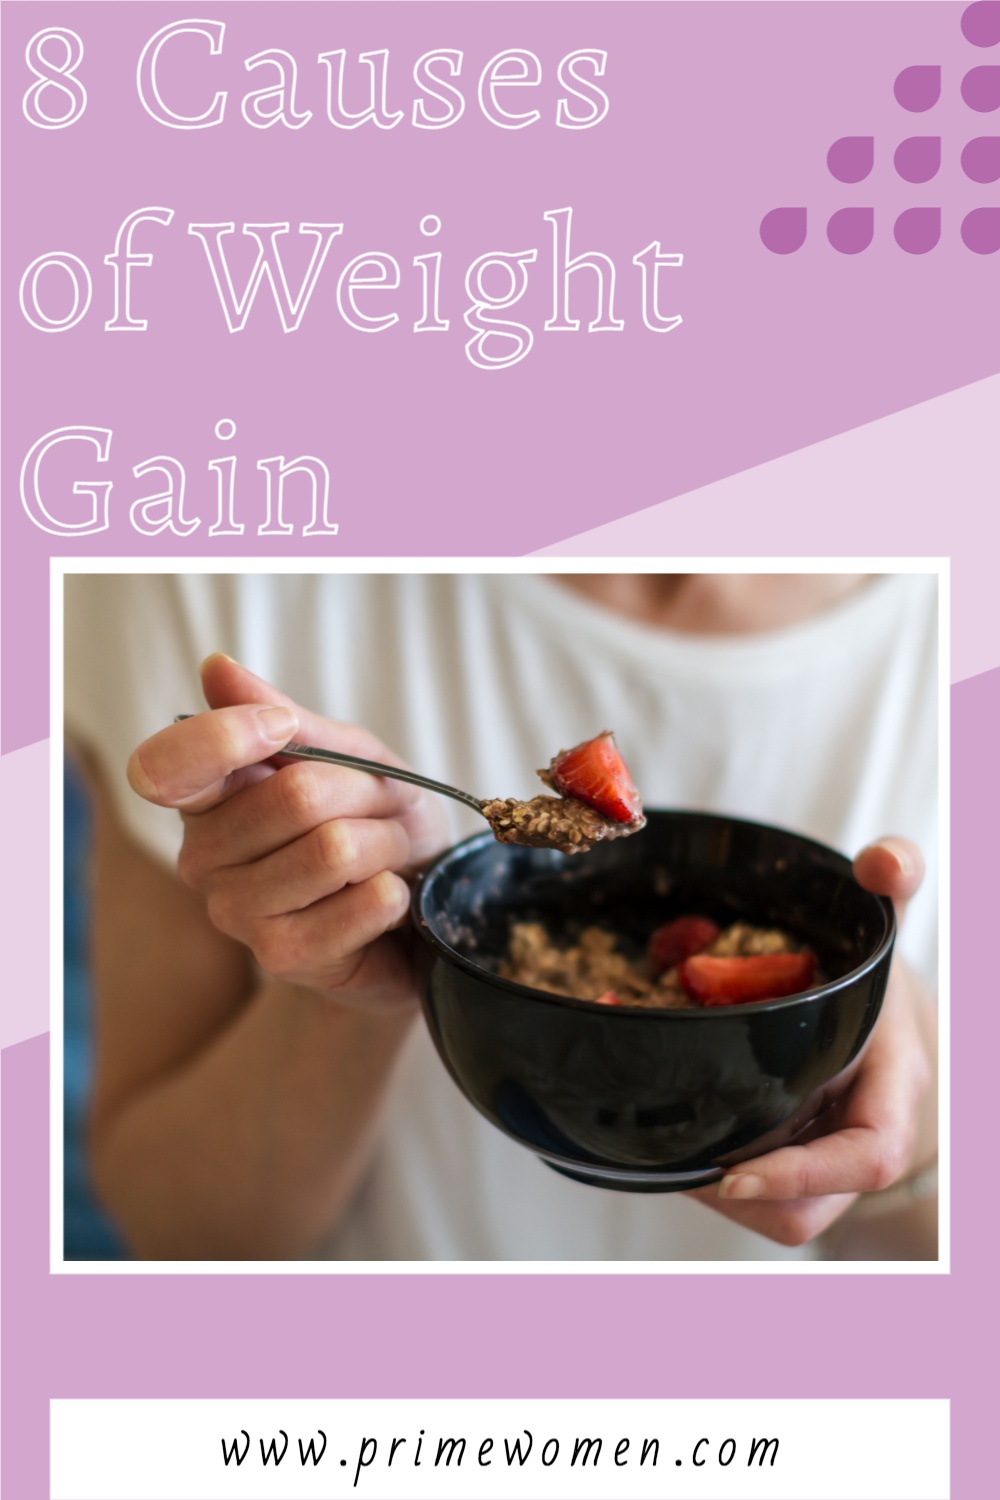 8 Causes of Weight Gain